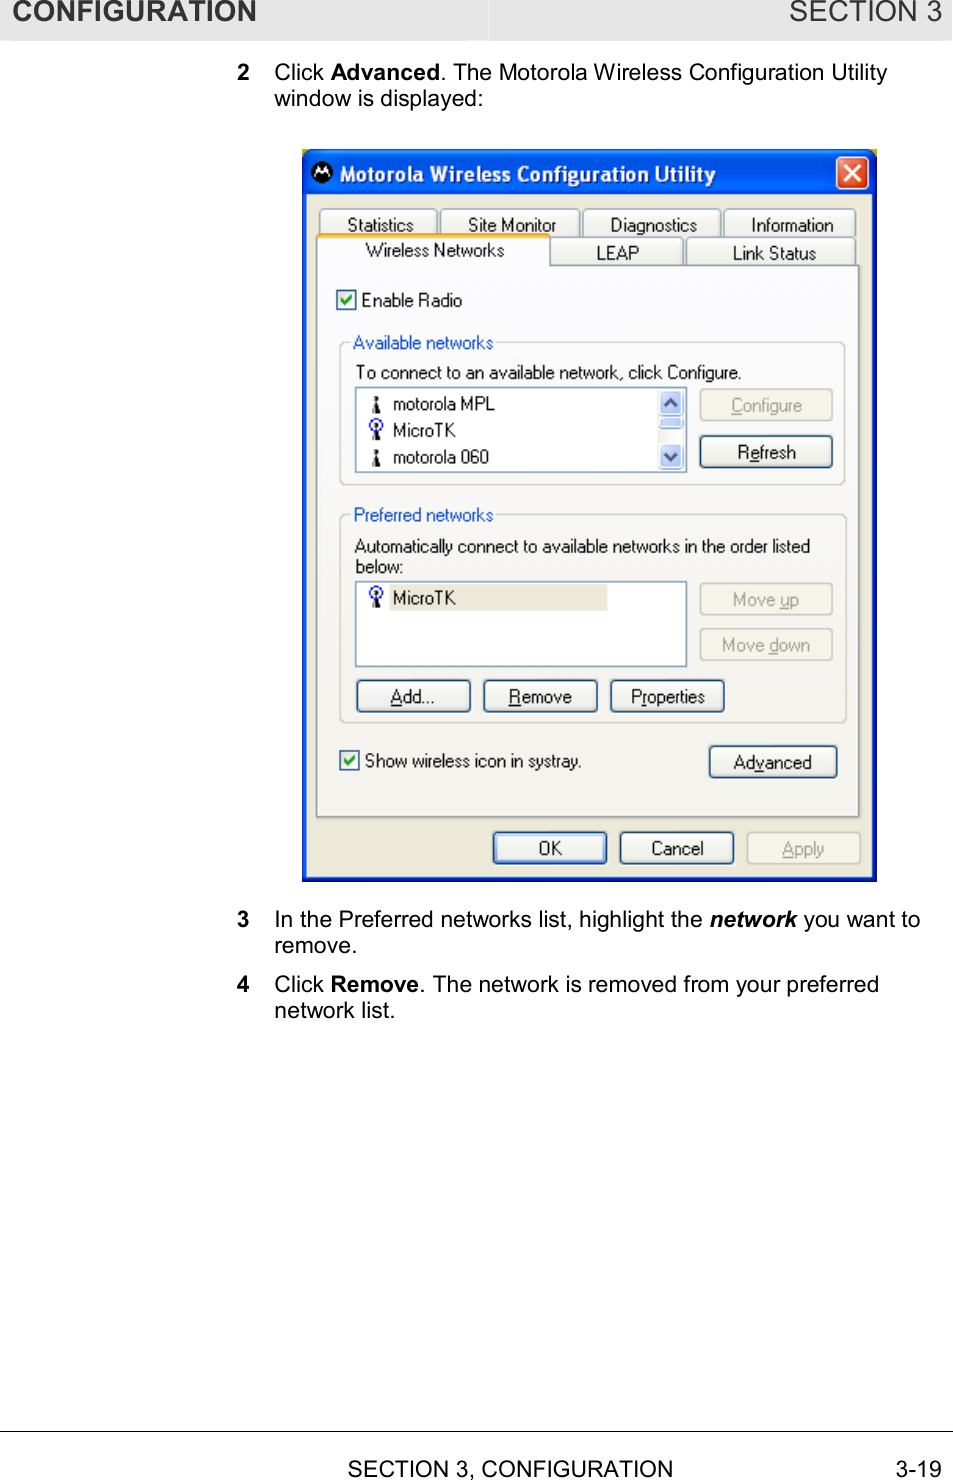 CONFIGURATION SECTION 3   SECTION 3, CONFIGURATION  3-19 2  Click Advanced. The Motorola Wireless Configuration Utility window is displayed:  3  In the Preferred networks list, highlight the network you want to remove. 4  Click Remove. The network is removed from your preferred network list. 